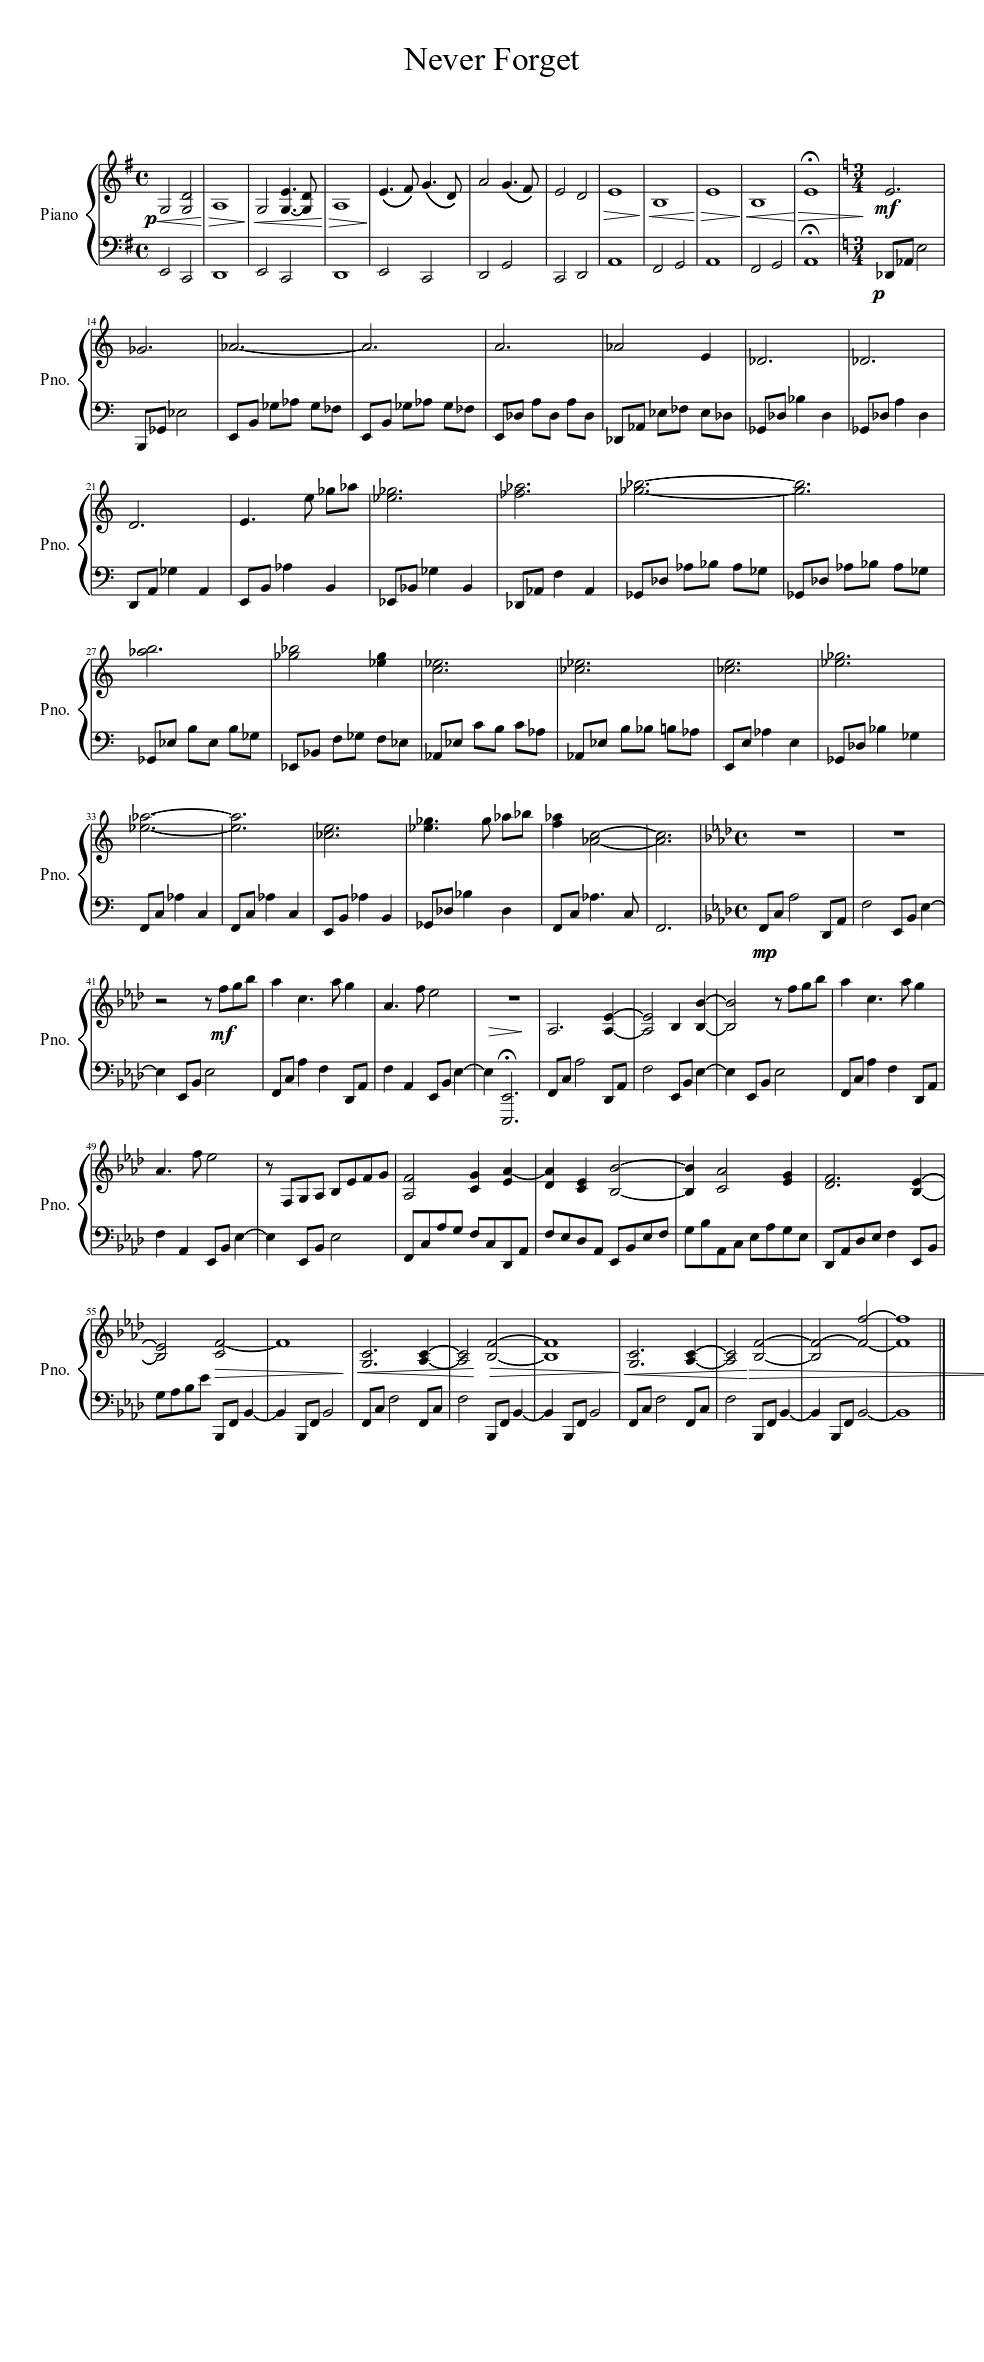 Glare have a finger in the pie exposure Never Forget by Martin O'Donnell Sheet music for Piano (Solo) |  Musescore.com